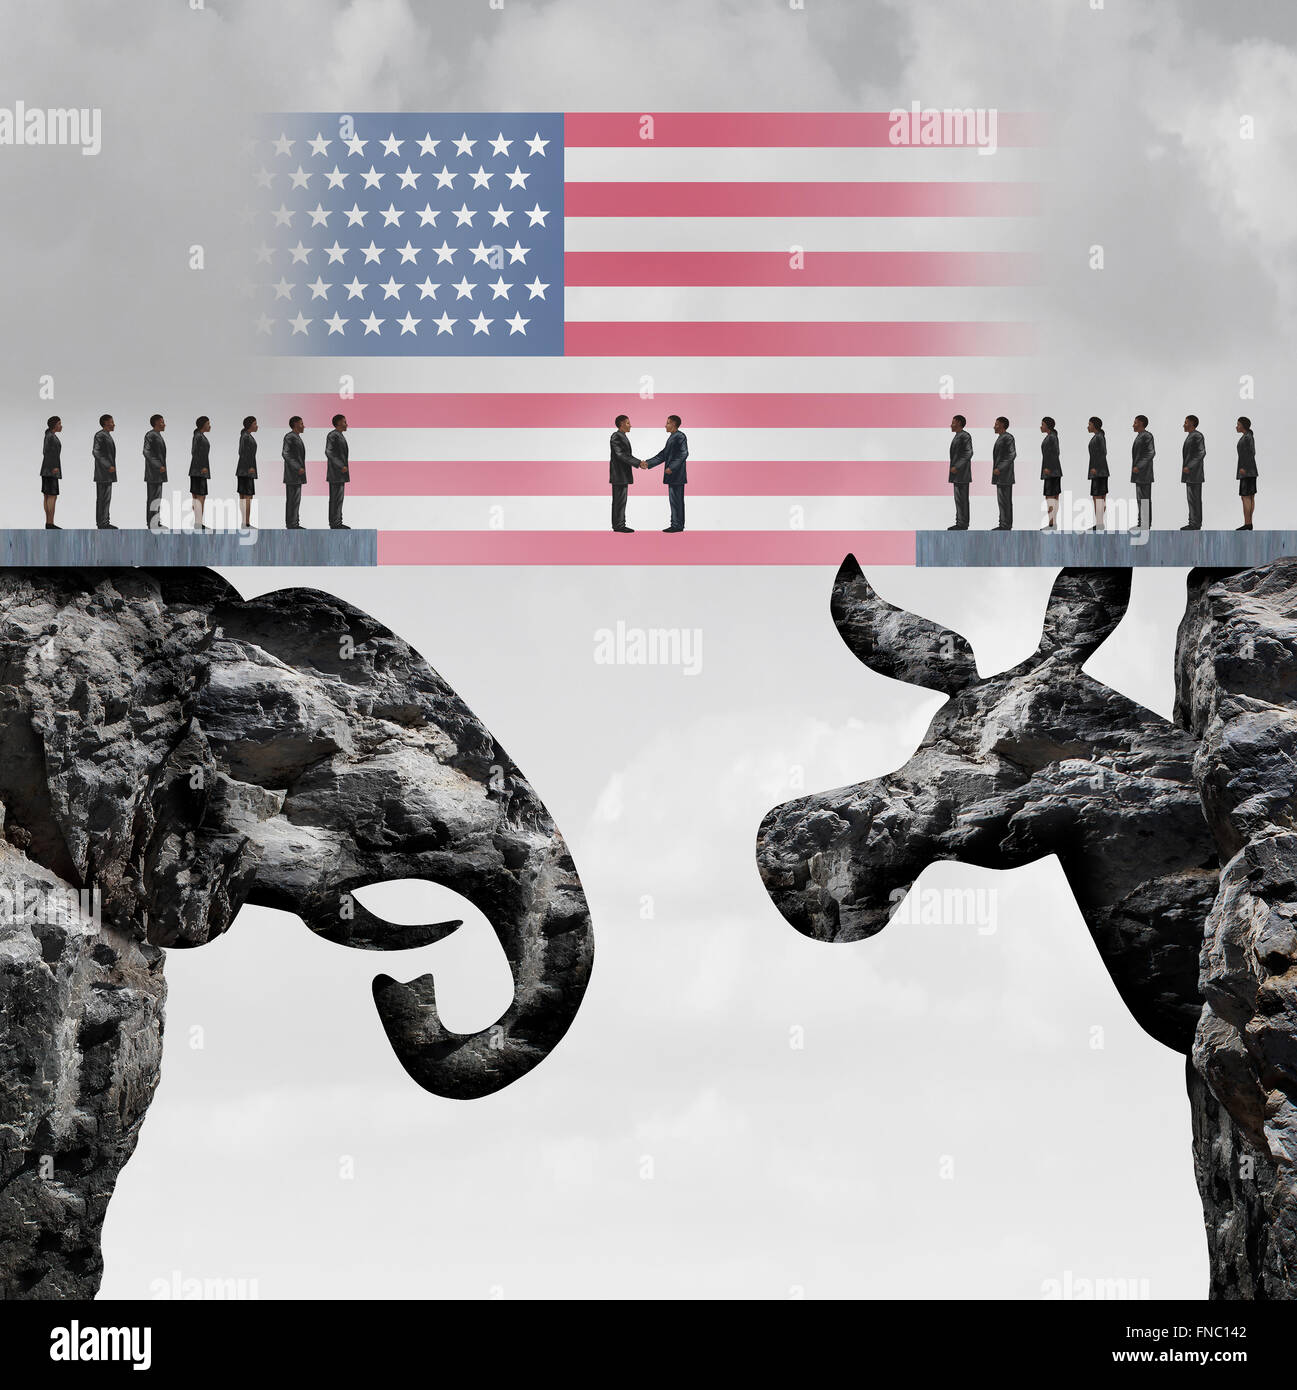 Bipartisan agreement between the republican and democrat organiization as a symbol for a two party system with a flag of the United States connecting two mountain cliffs shaped as an elephant and donkey. Stock Photo